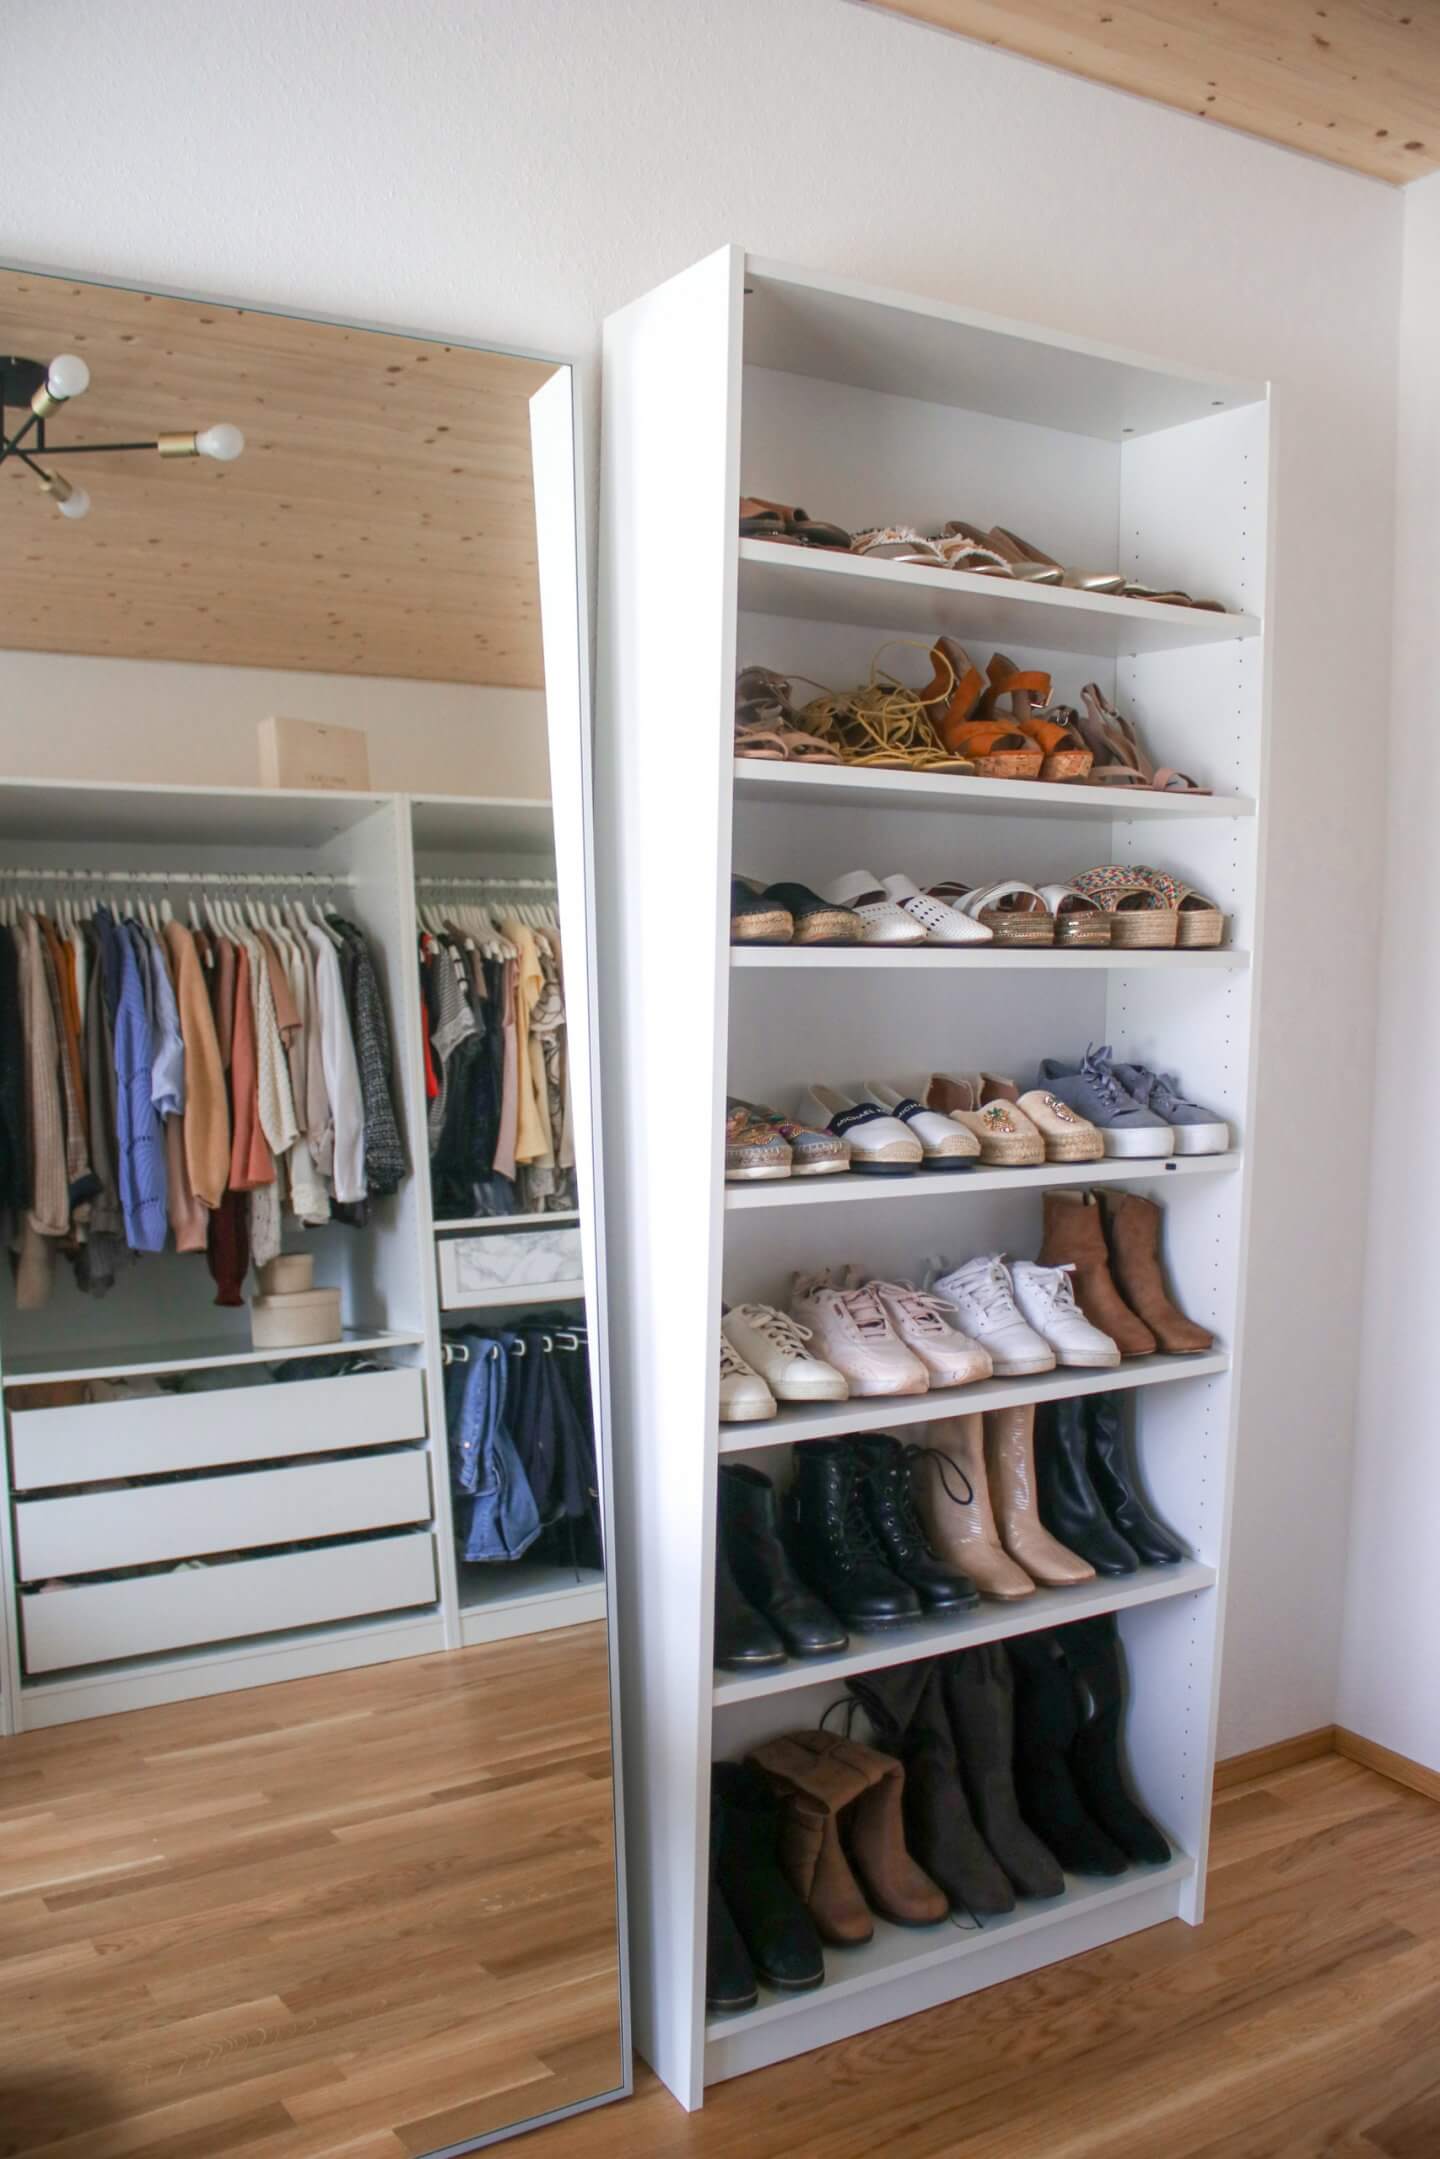 Ikea Billy as a shoe rack - perfect for walk-in closet & dressing room